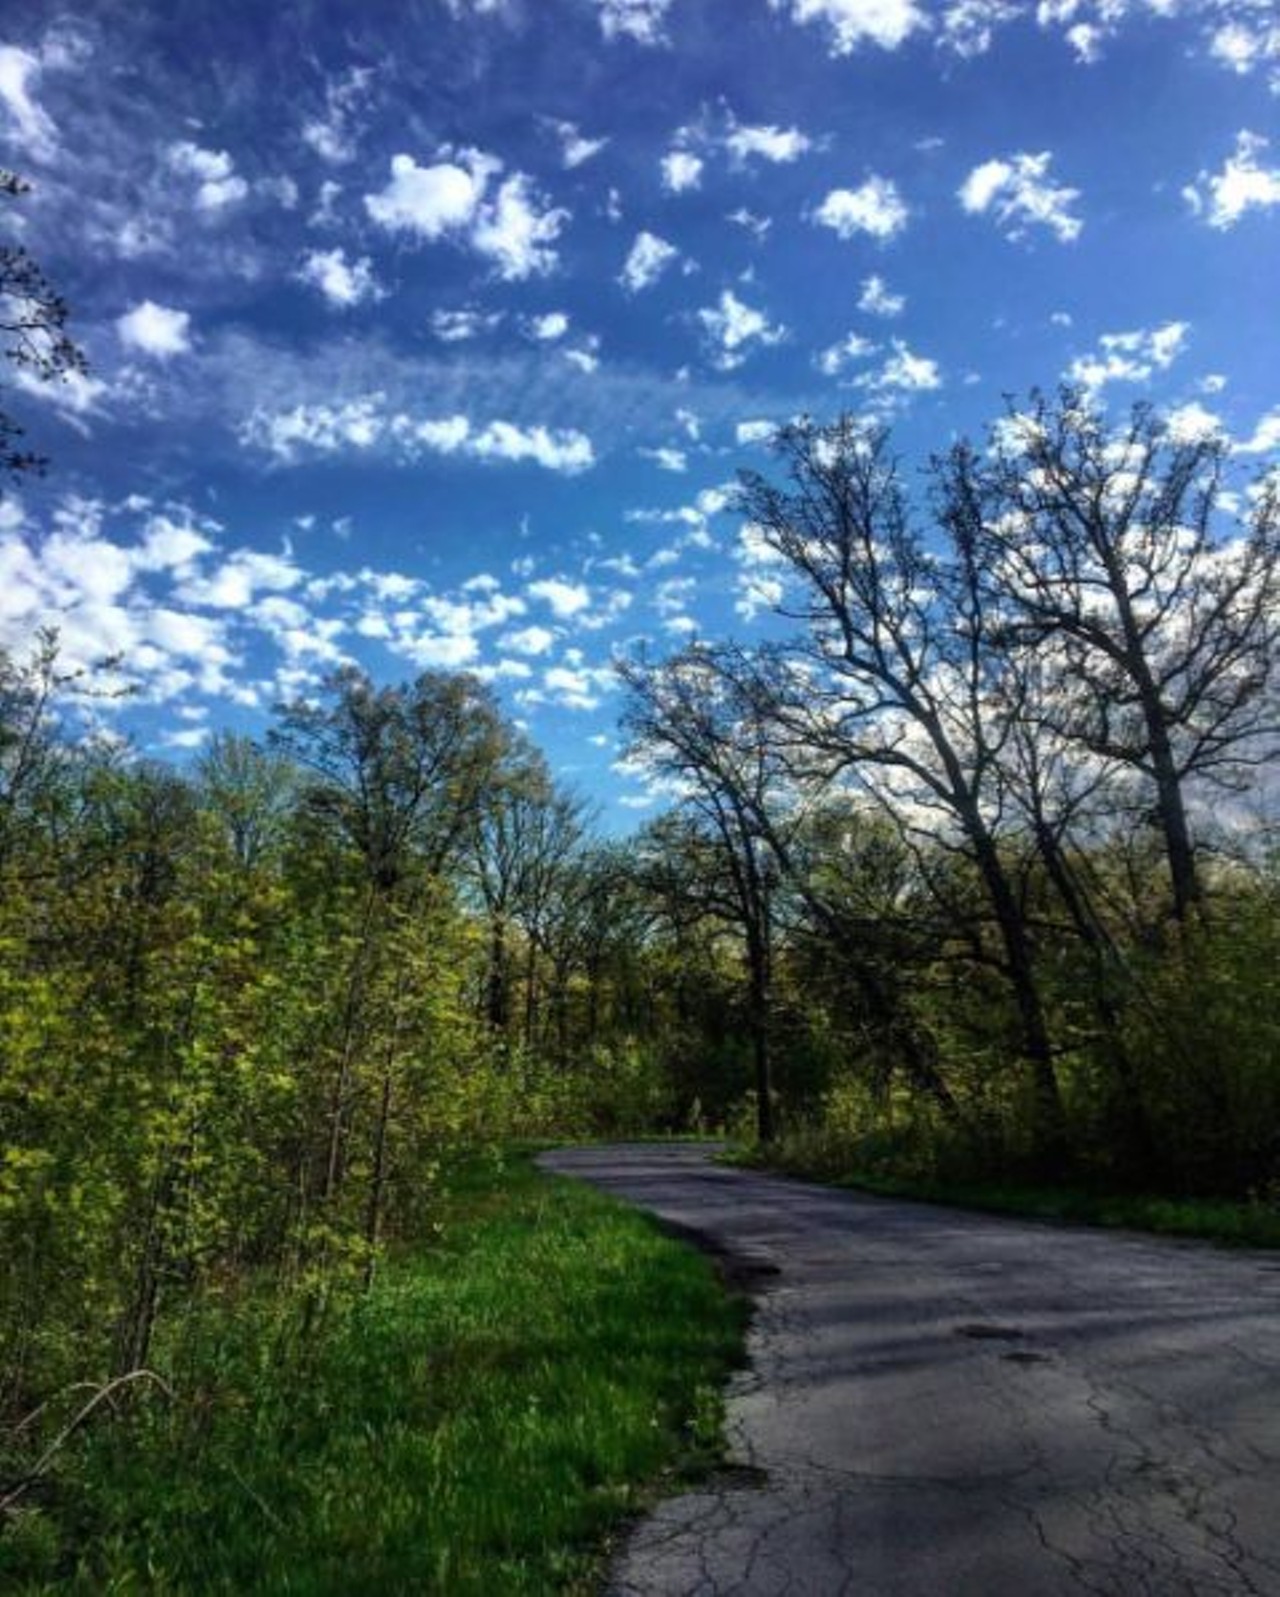 Belle Isle
The six mile road that follows the perimeter of the island is another beautiful and peaceful place for a run. On this route you will be able to see much of what the island offers in addition to iconic waterfront views of downtown Detroit, Windsor and the Detroit River.
Photo via IG user @belleislestatepark